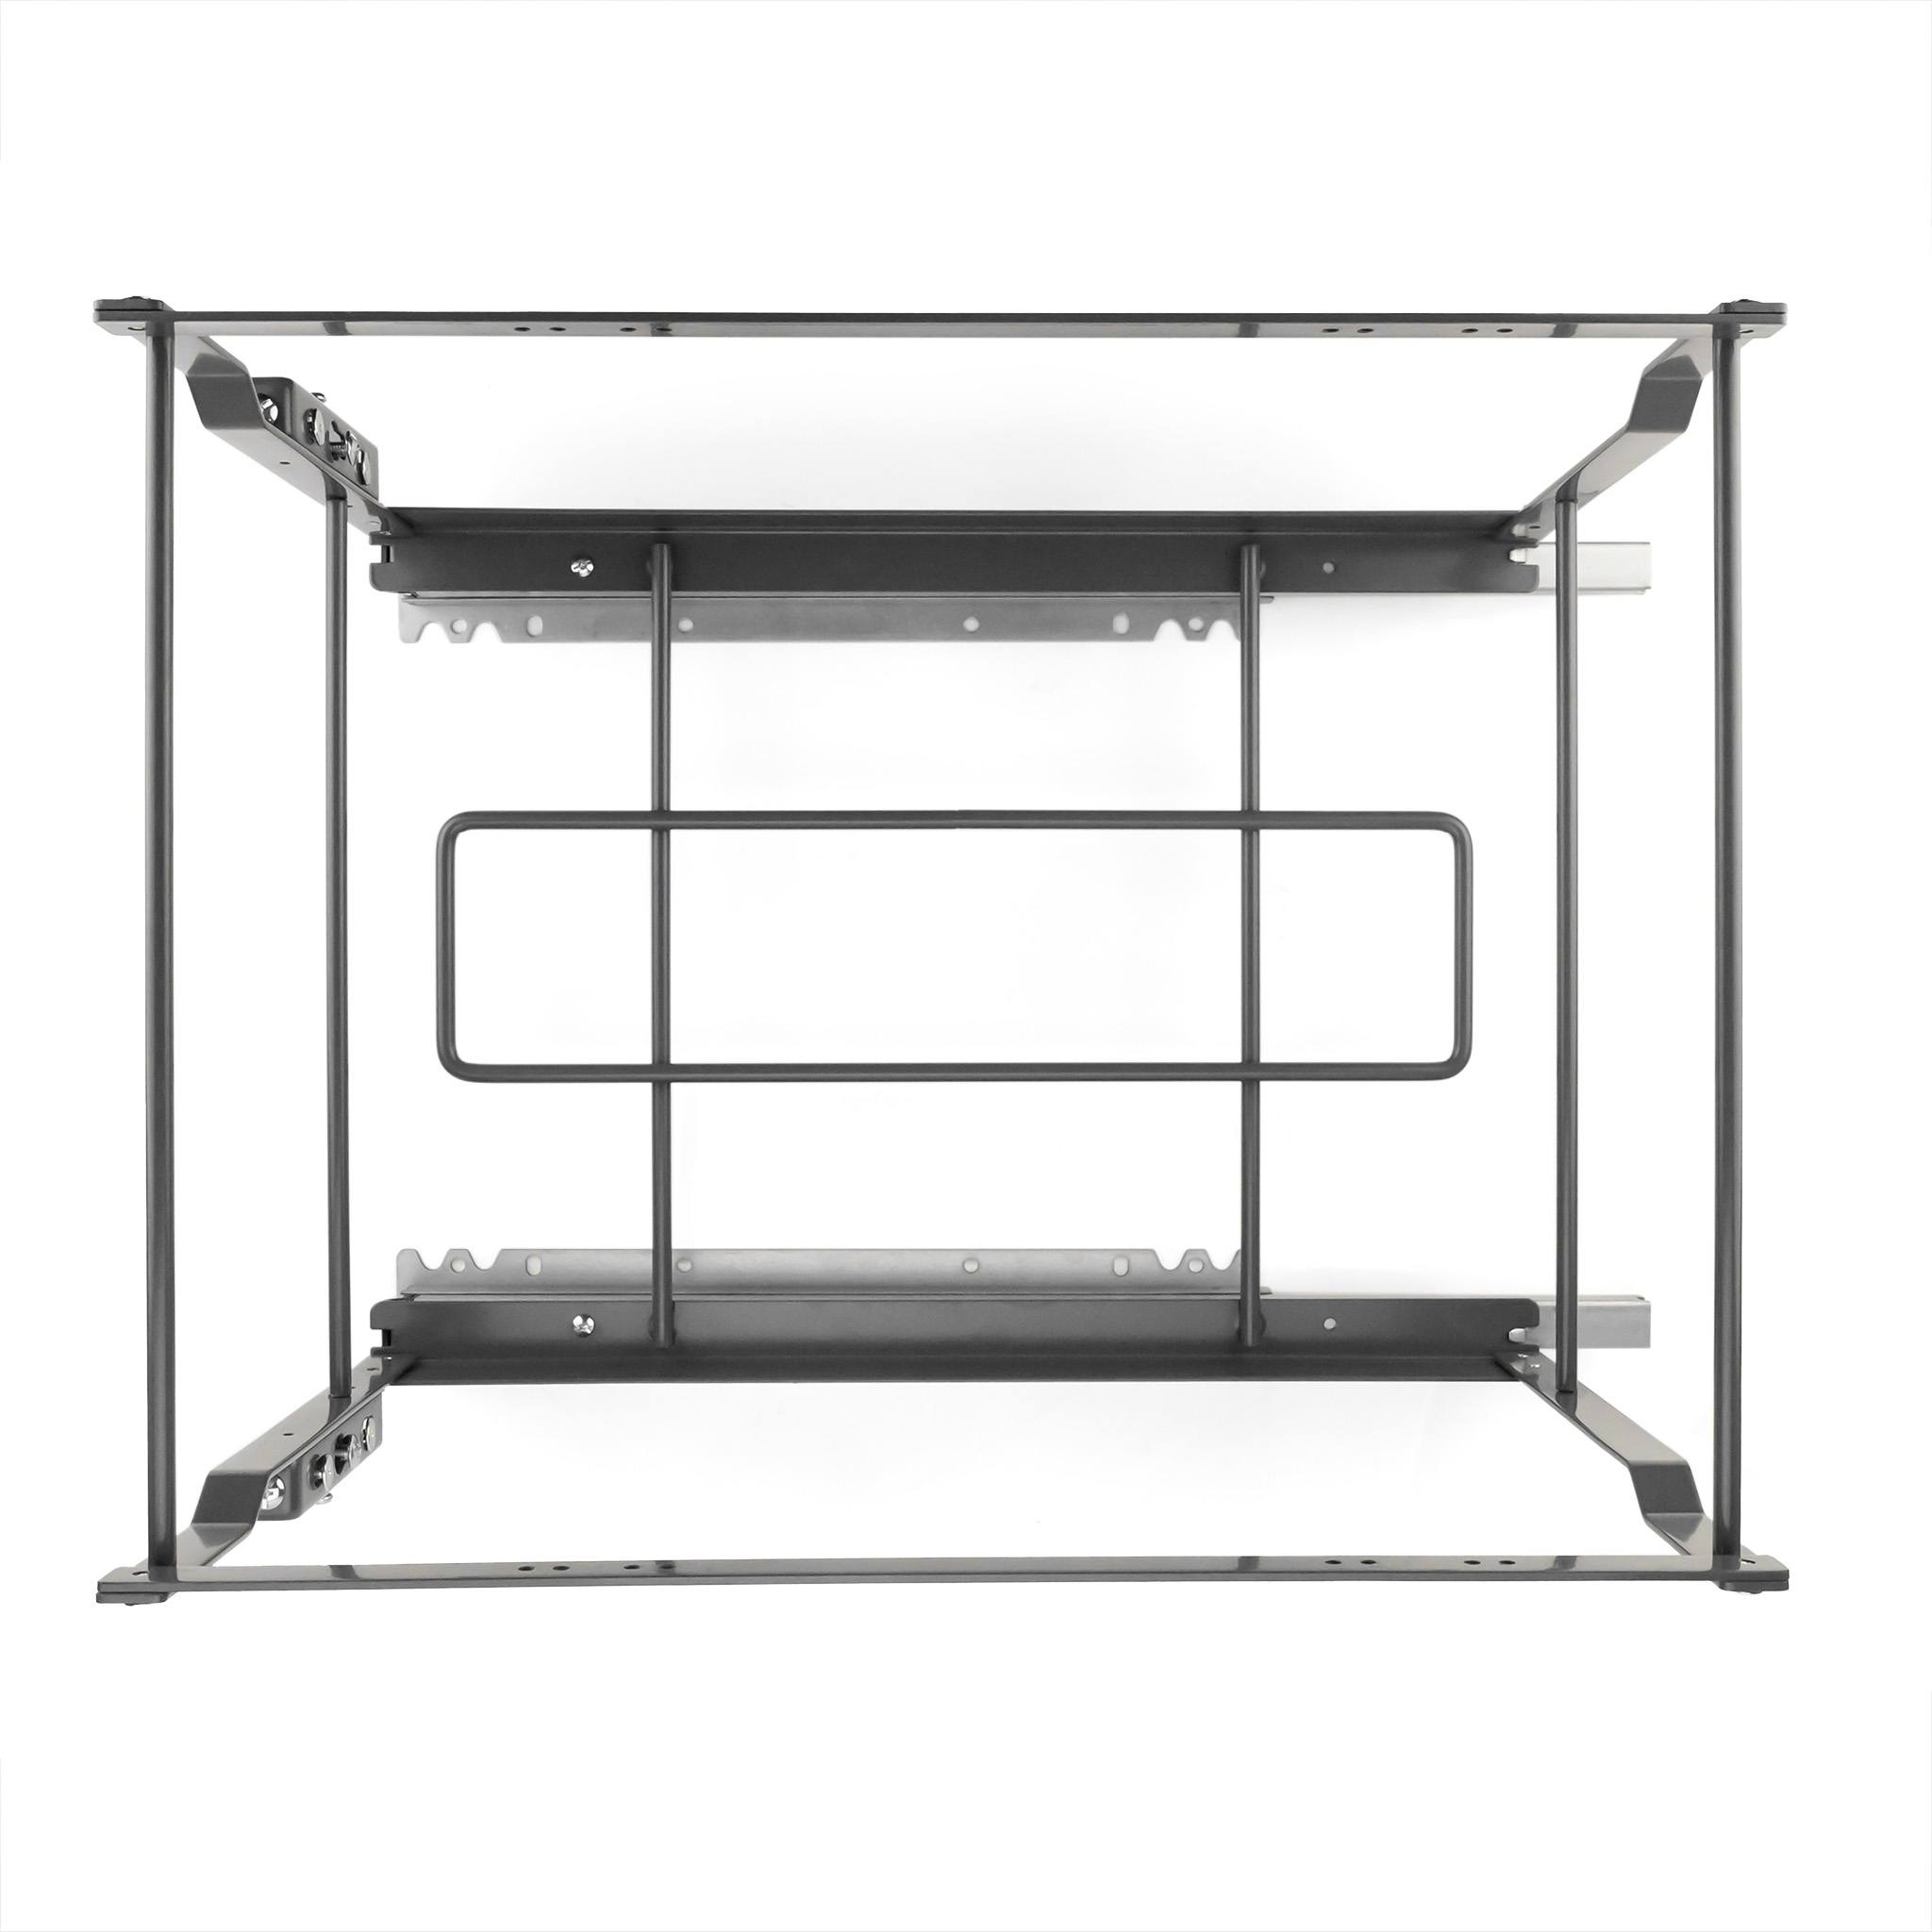 M-Series SpaceBin Frame, 18in, Anthracite